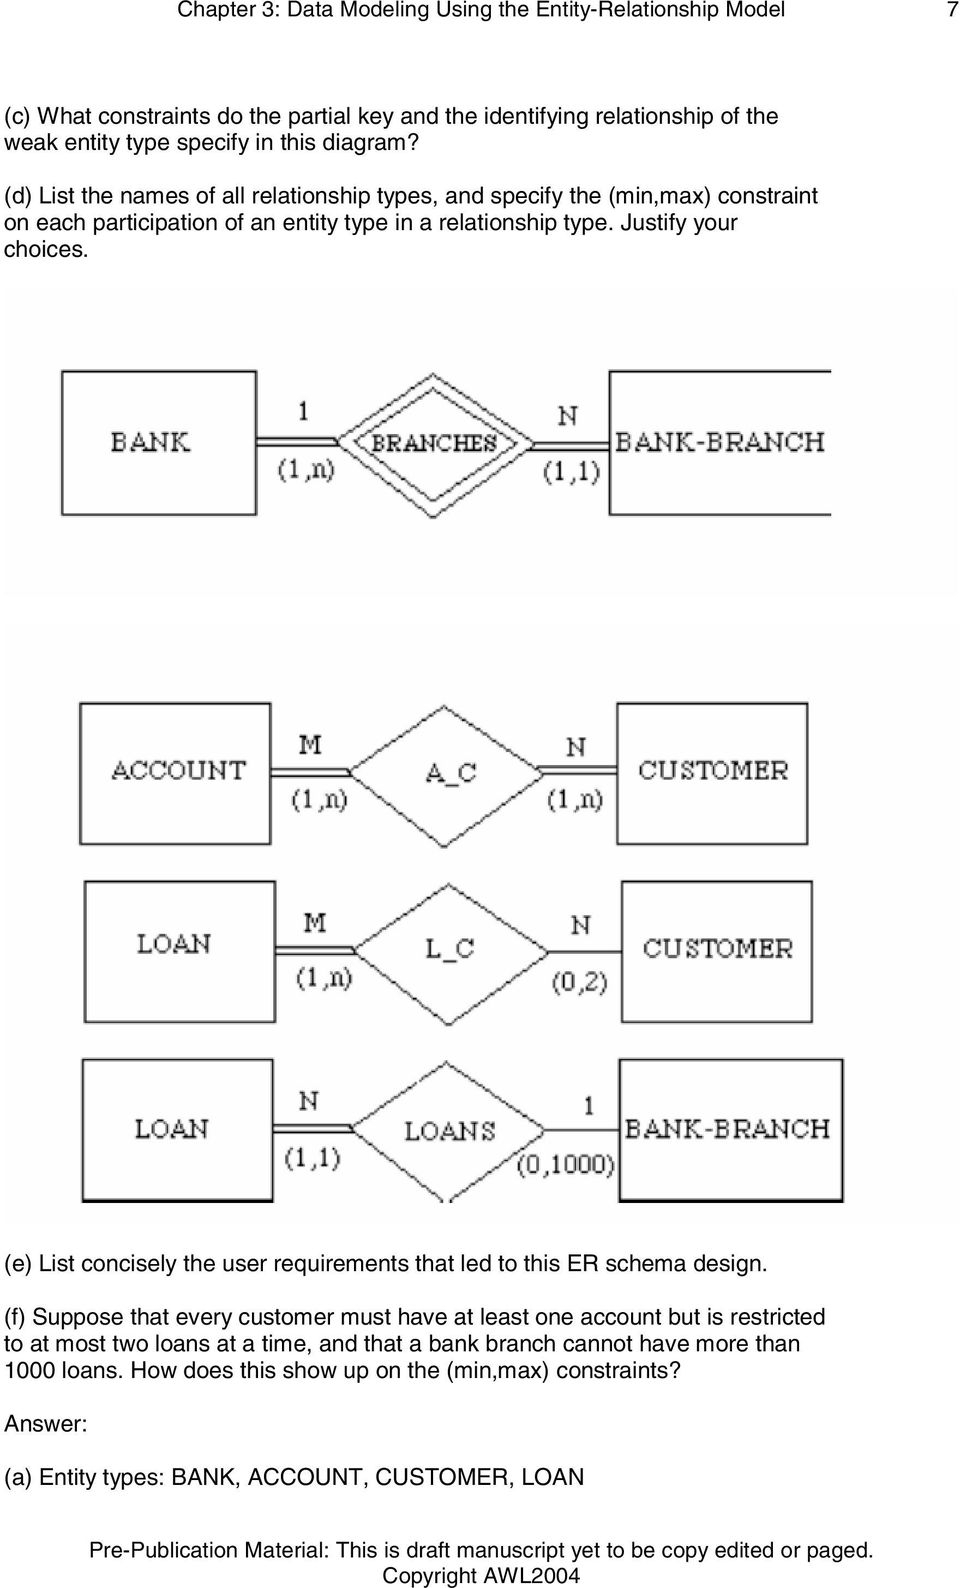 Chapter 3: Data Modeling Using The Entity-Relationship Model for Er Diagram At Least One